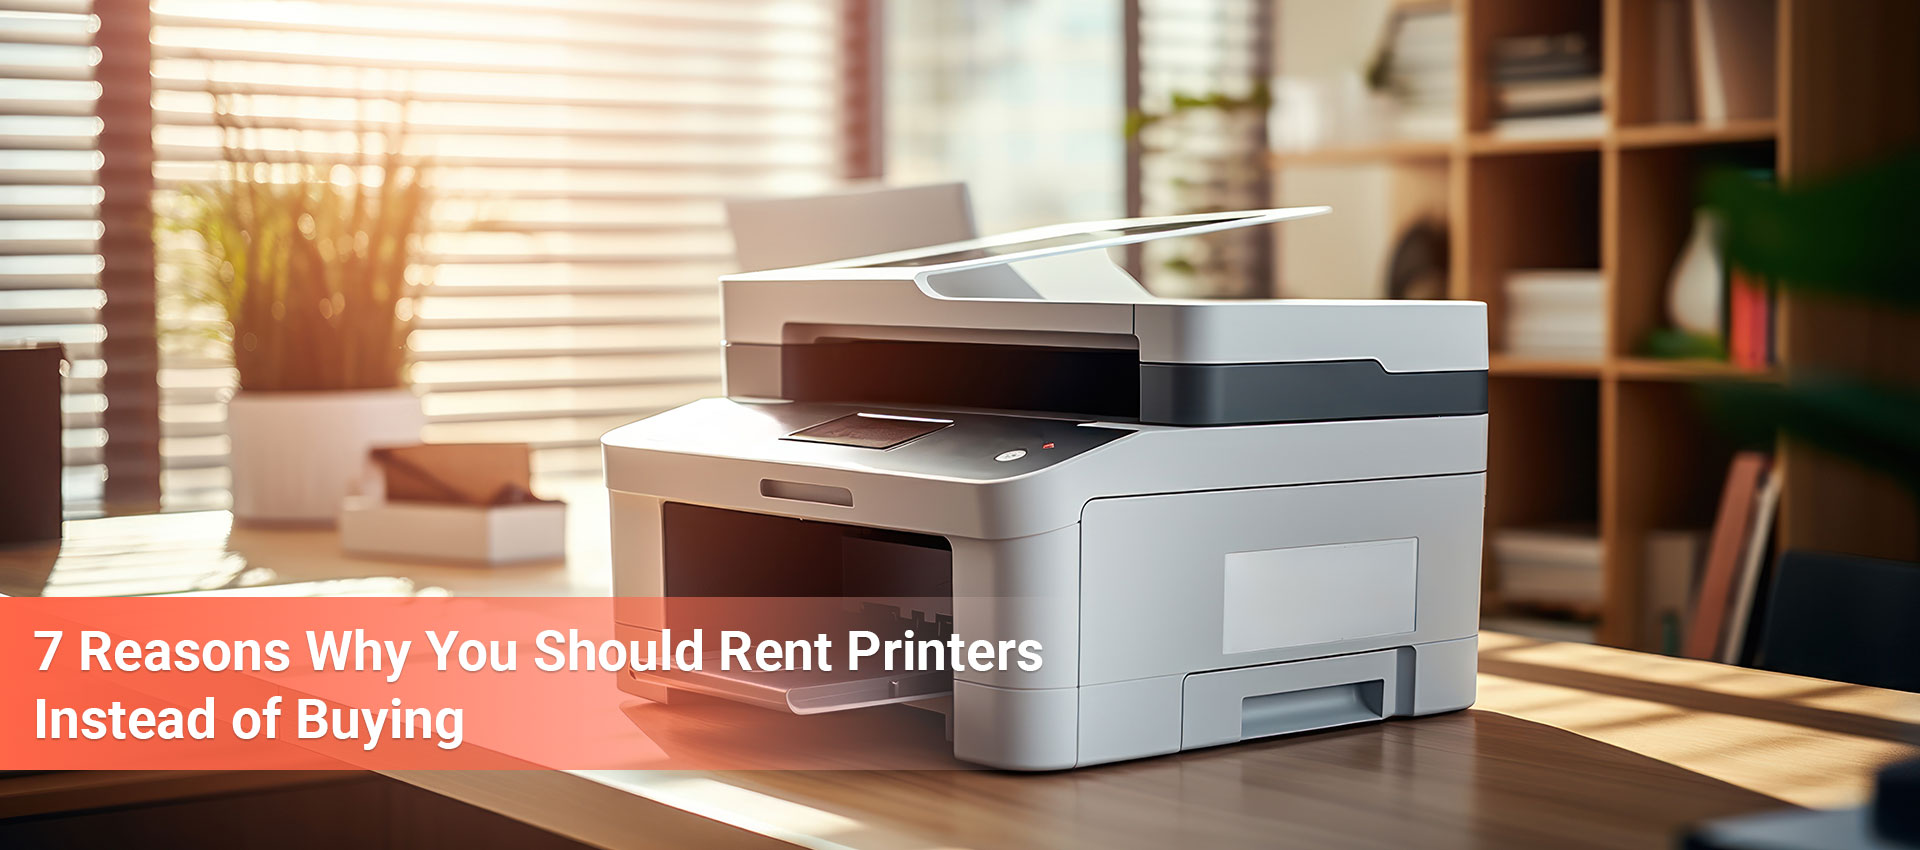 banner image of our blog on 7 Reasons Why You Should Rent Printers Instead of Buying